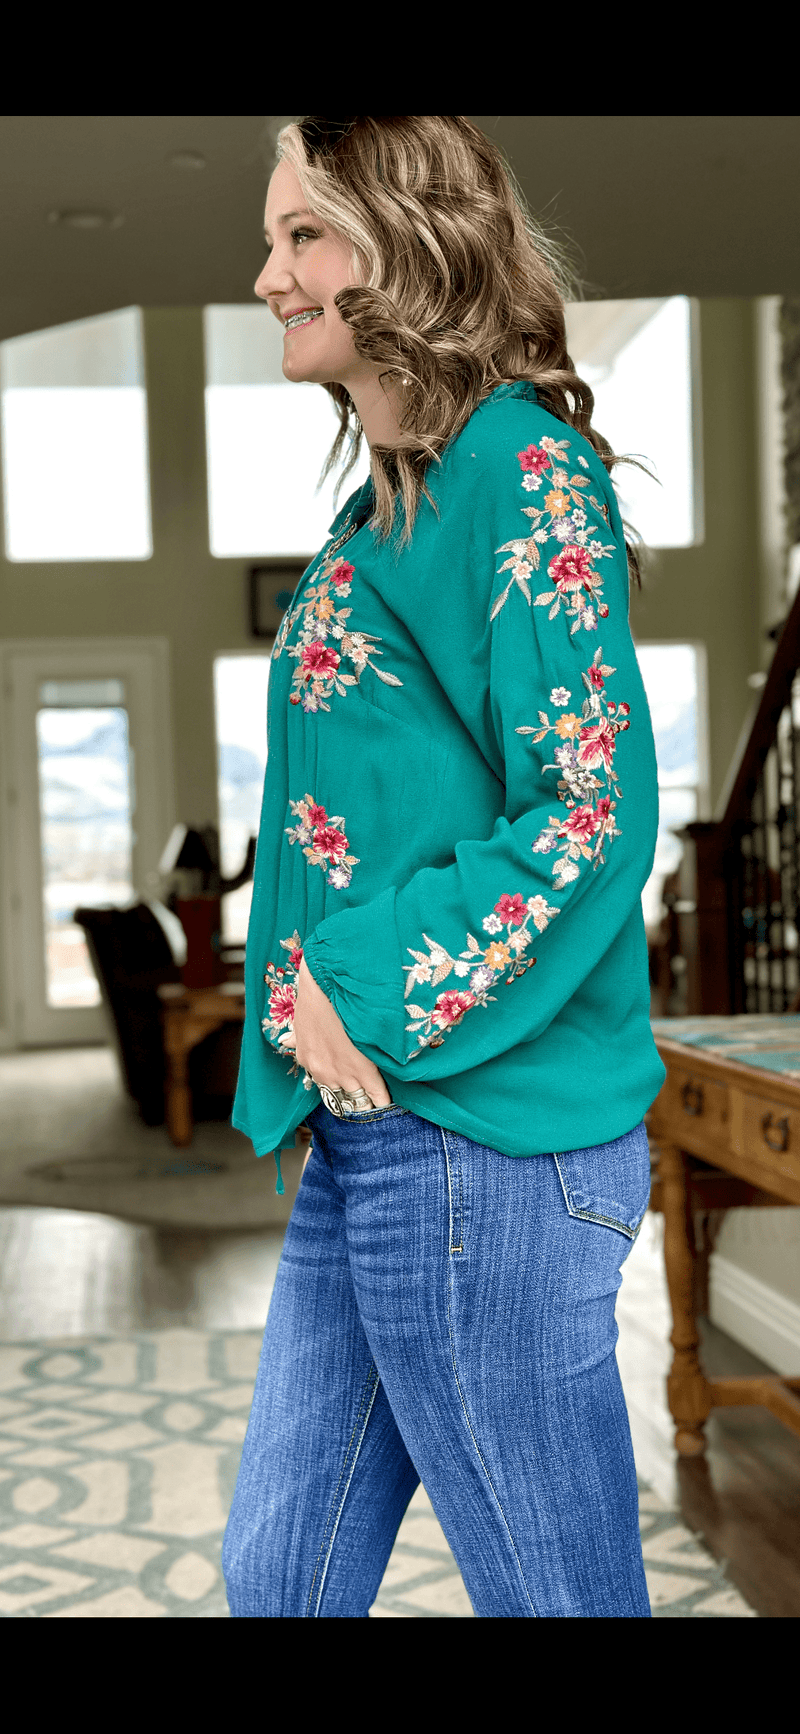 The Las Chisas Spring Embroidered Top